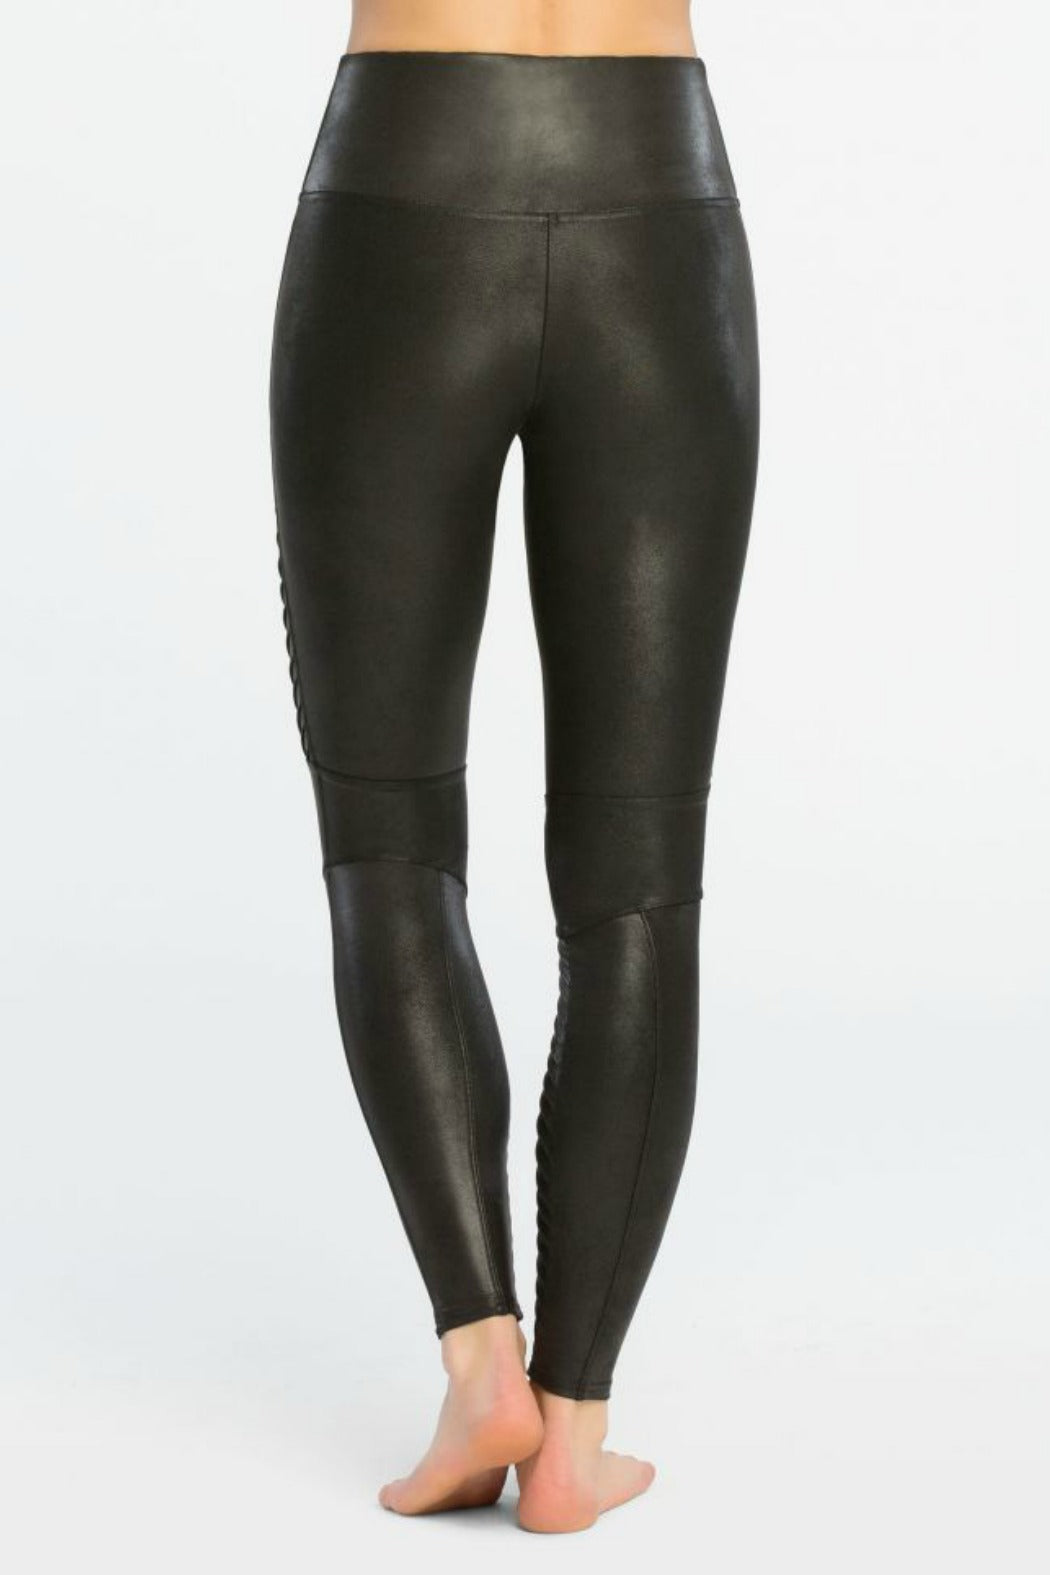 Liquid Leather Leggings - Lizzy's Pink Boutique